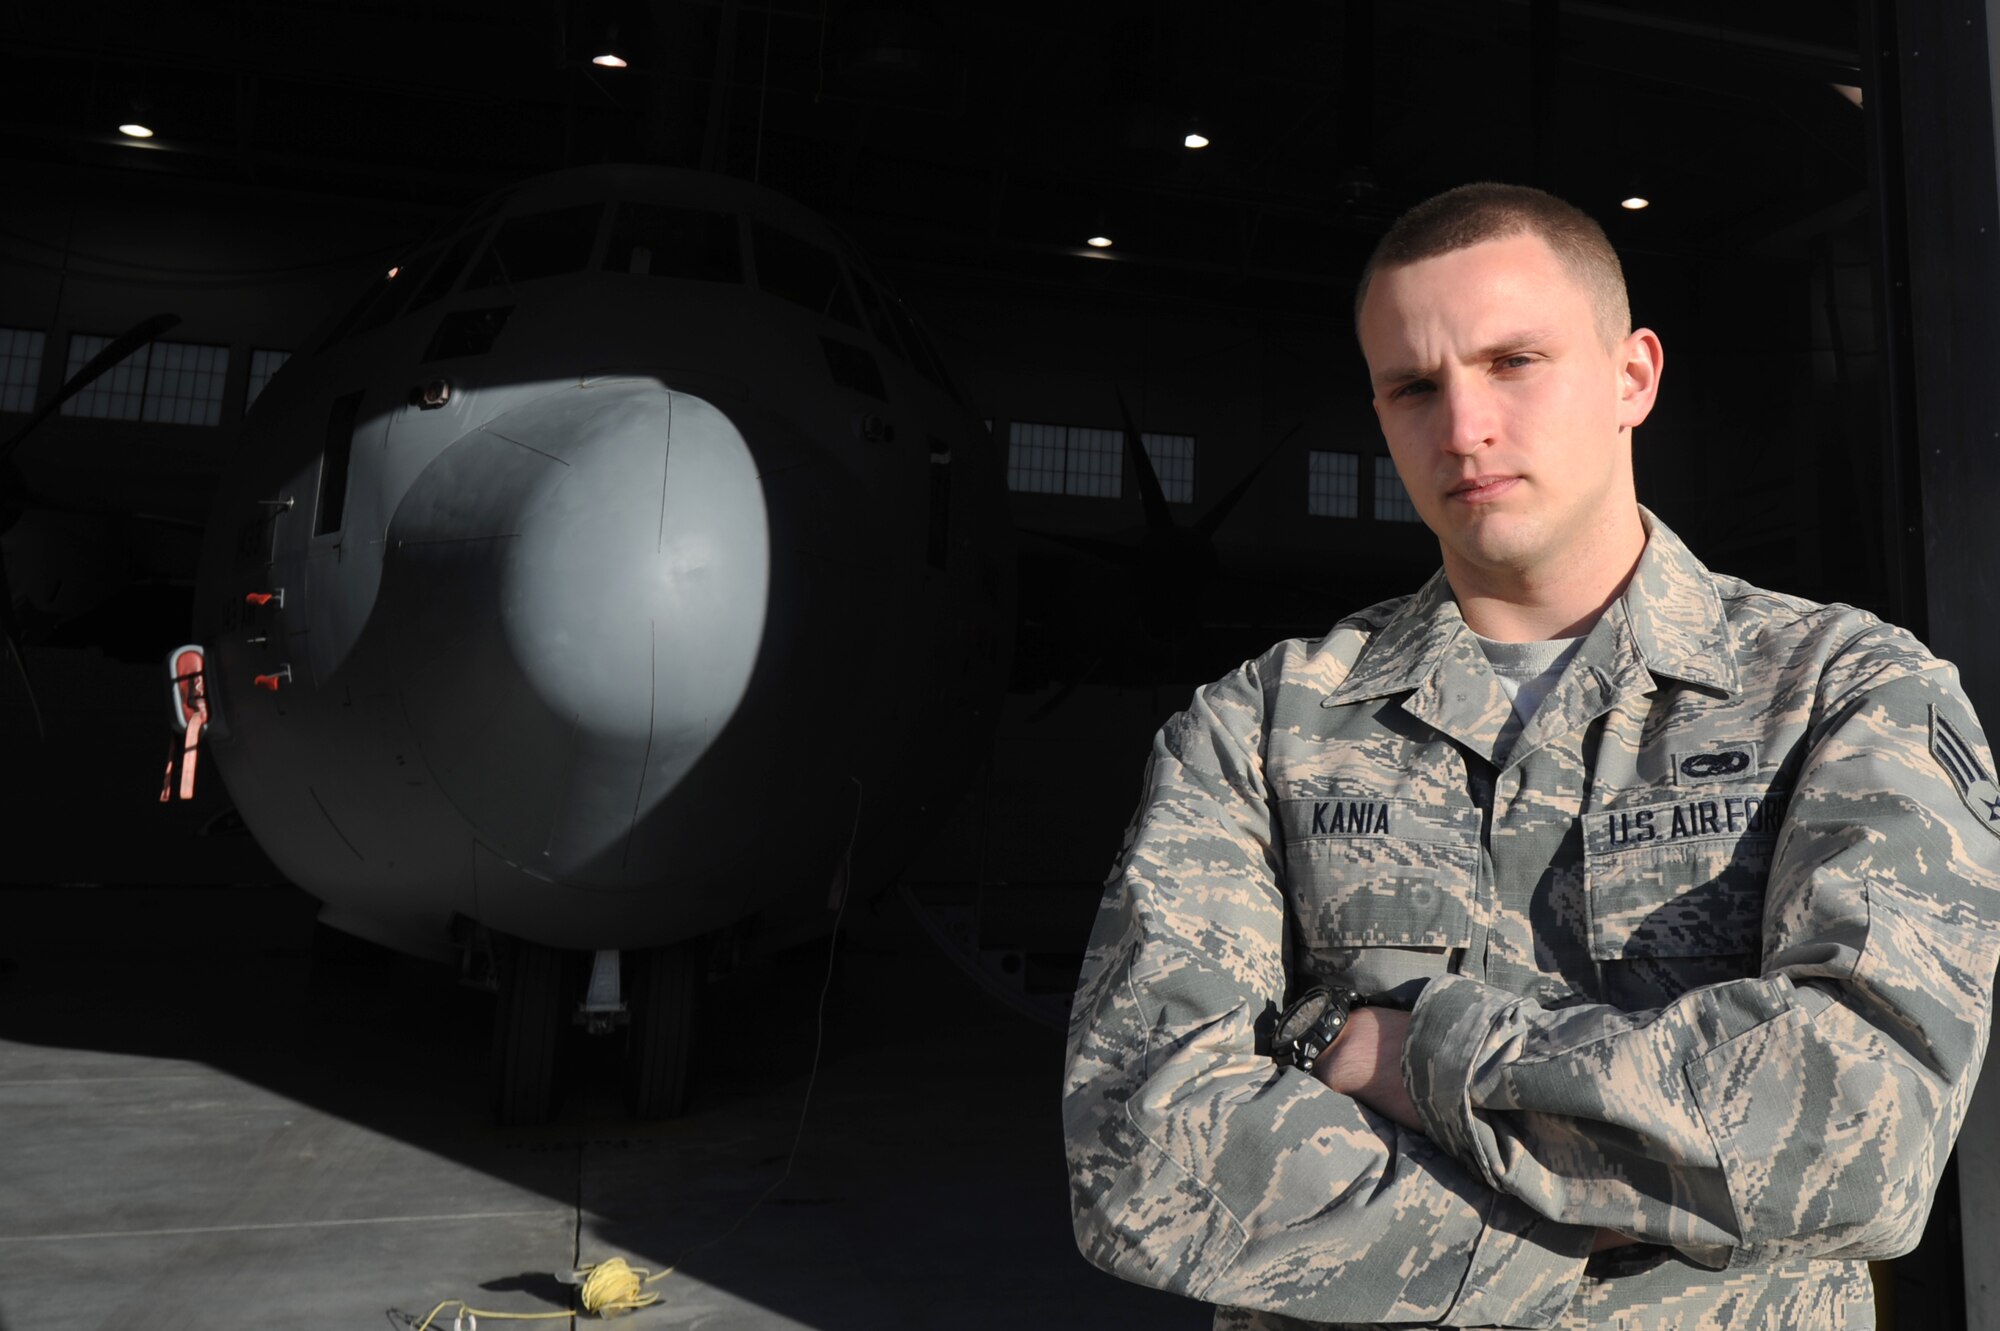 U.S. Air Force Senior Airman Gregory Kania, 19th
Maintenance Squadron aircraft fuel systems journeyman, was nominated as Combat Airlifter of the Week Dec.19, 2016, at Little Rock Air Force Base, Ark. Kania exemplifies the Service Before Self core value at all times, regardless of the situation. (U.S. Air Force photo by Airman 1st Class Grace Nichols)